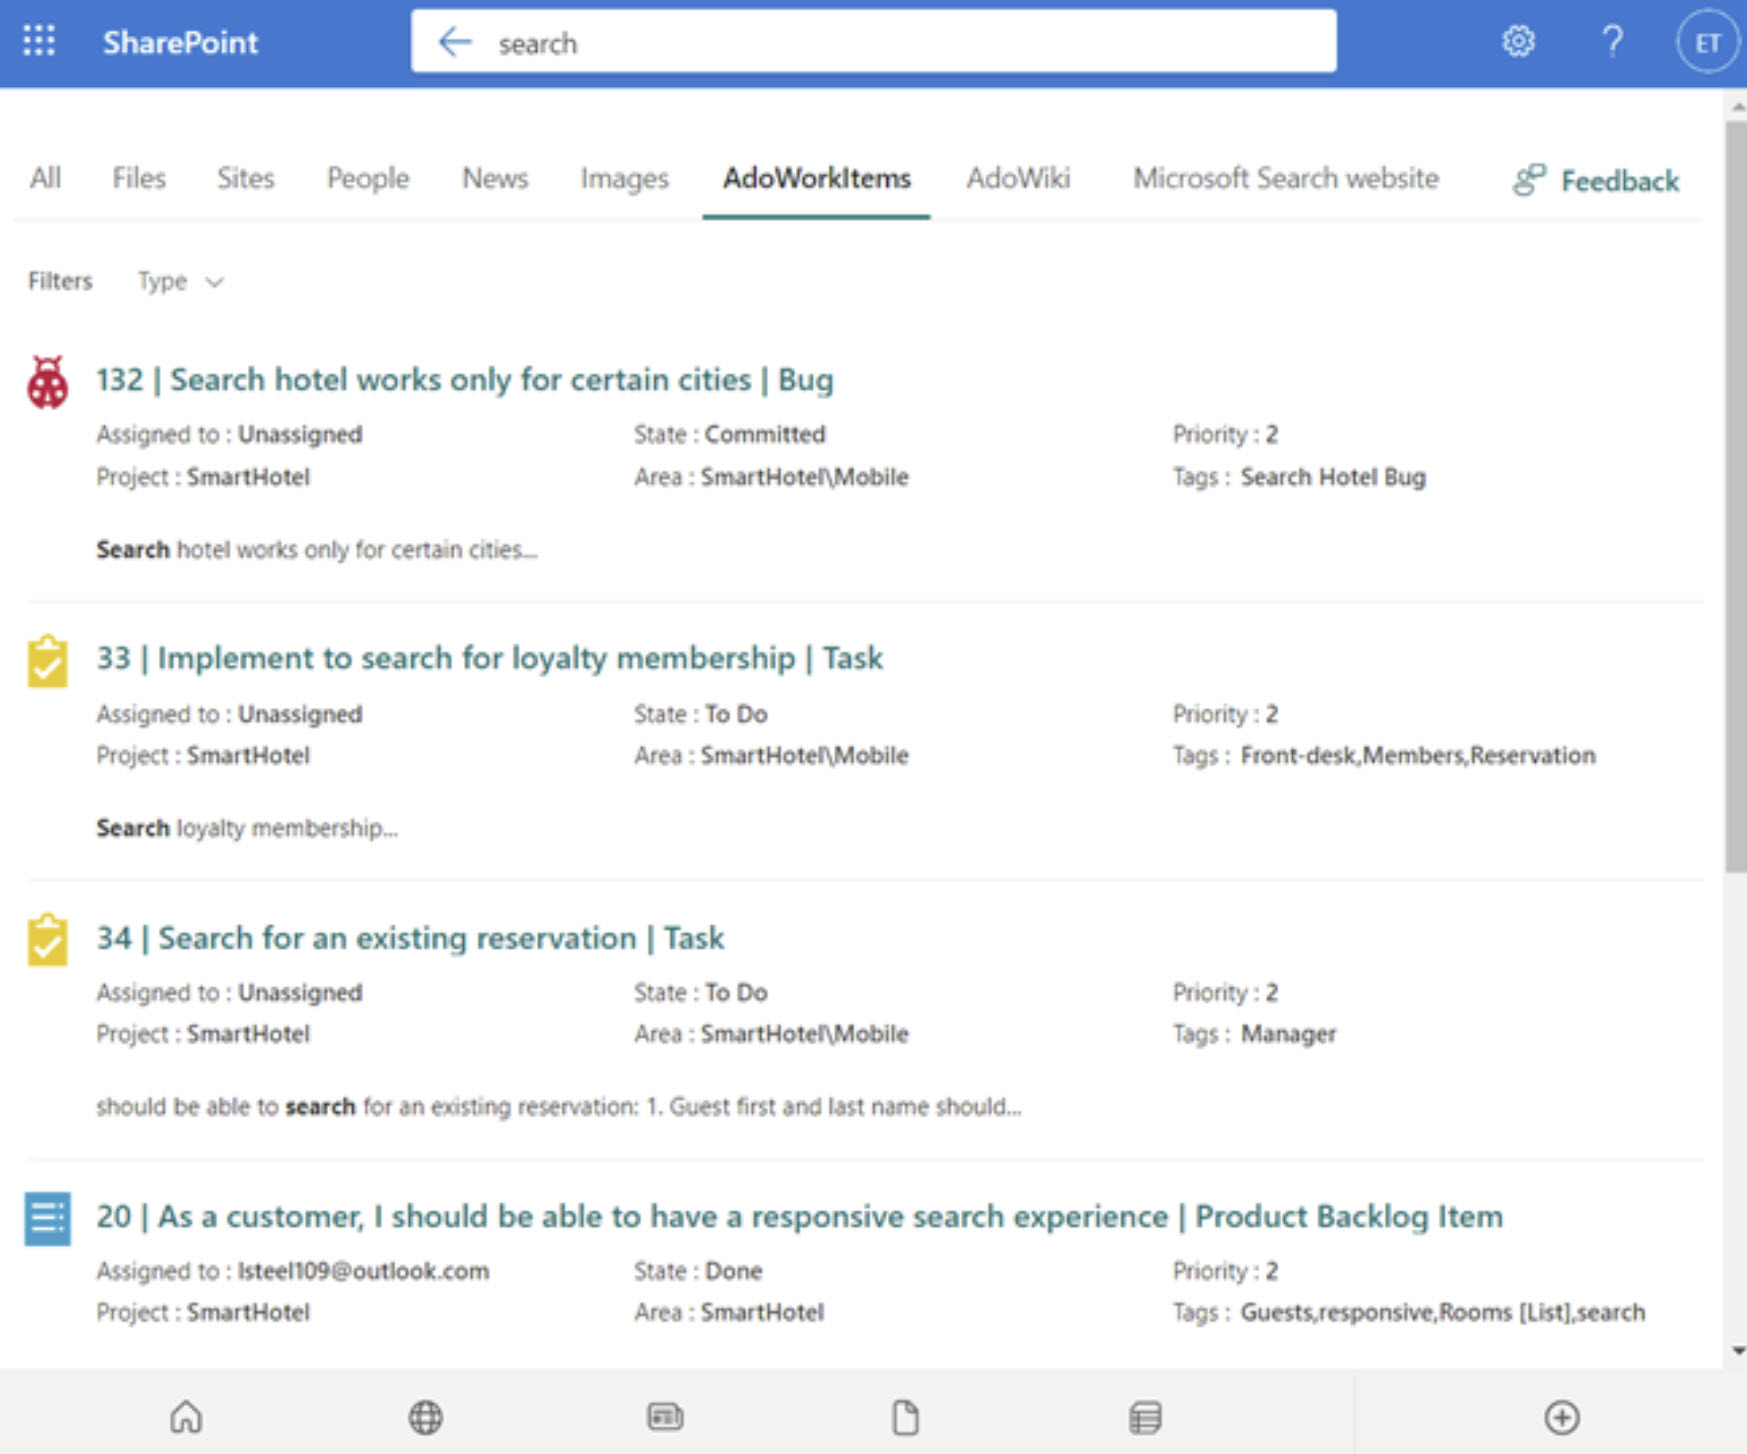 Azure DevOps Work Items in SharePoint search results